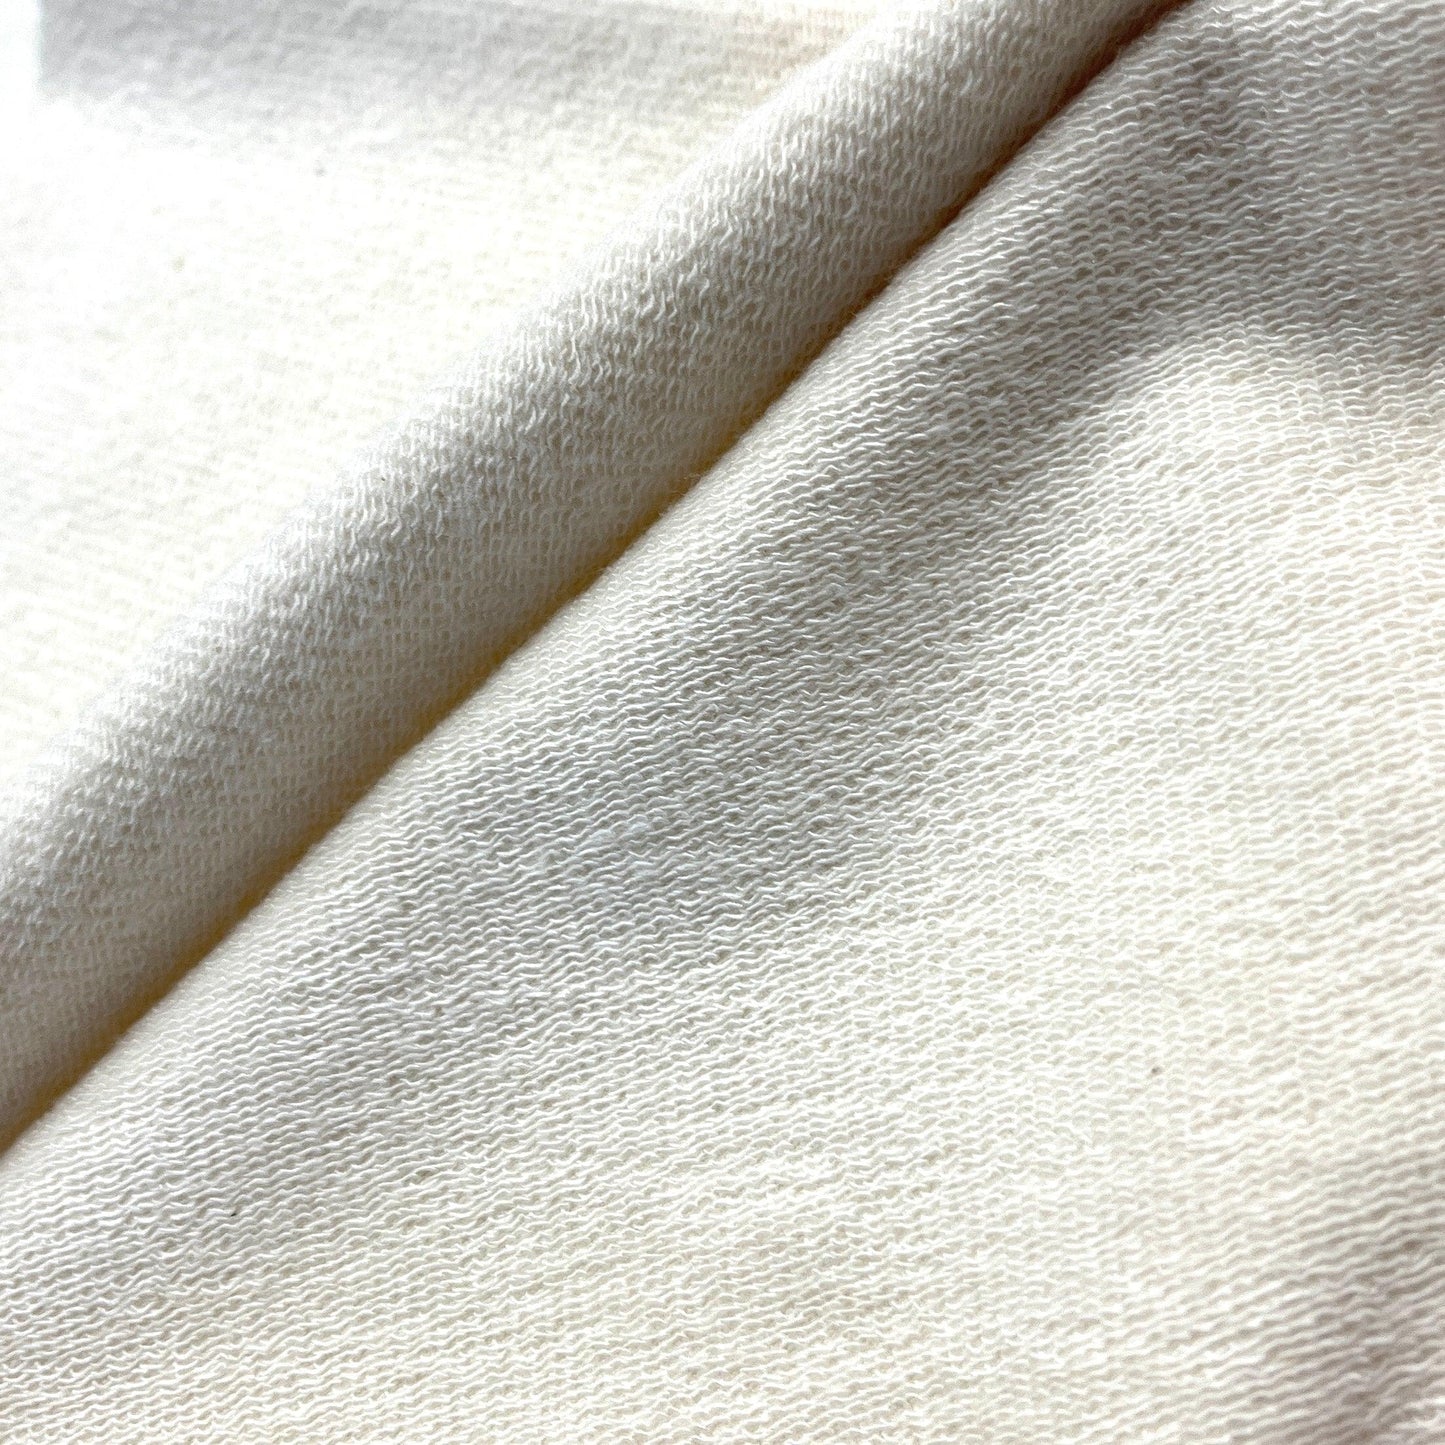 Natural Bamboo Stretch French Terry Fabric - 360 GSM - Knit in the USA, $16.49/yd - Rolls - Nature's Fabrics